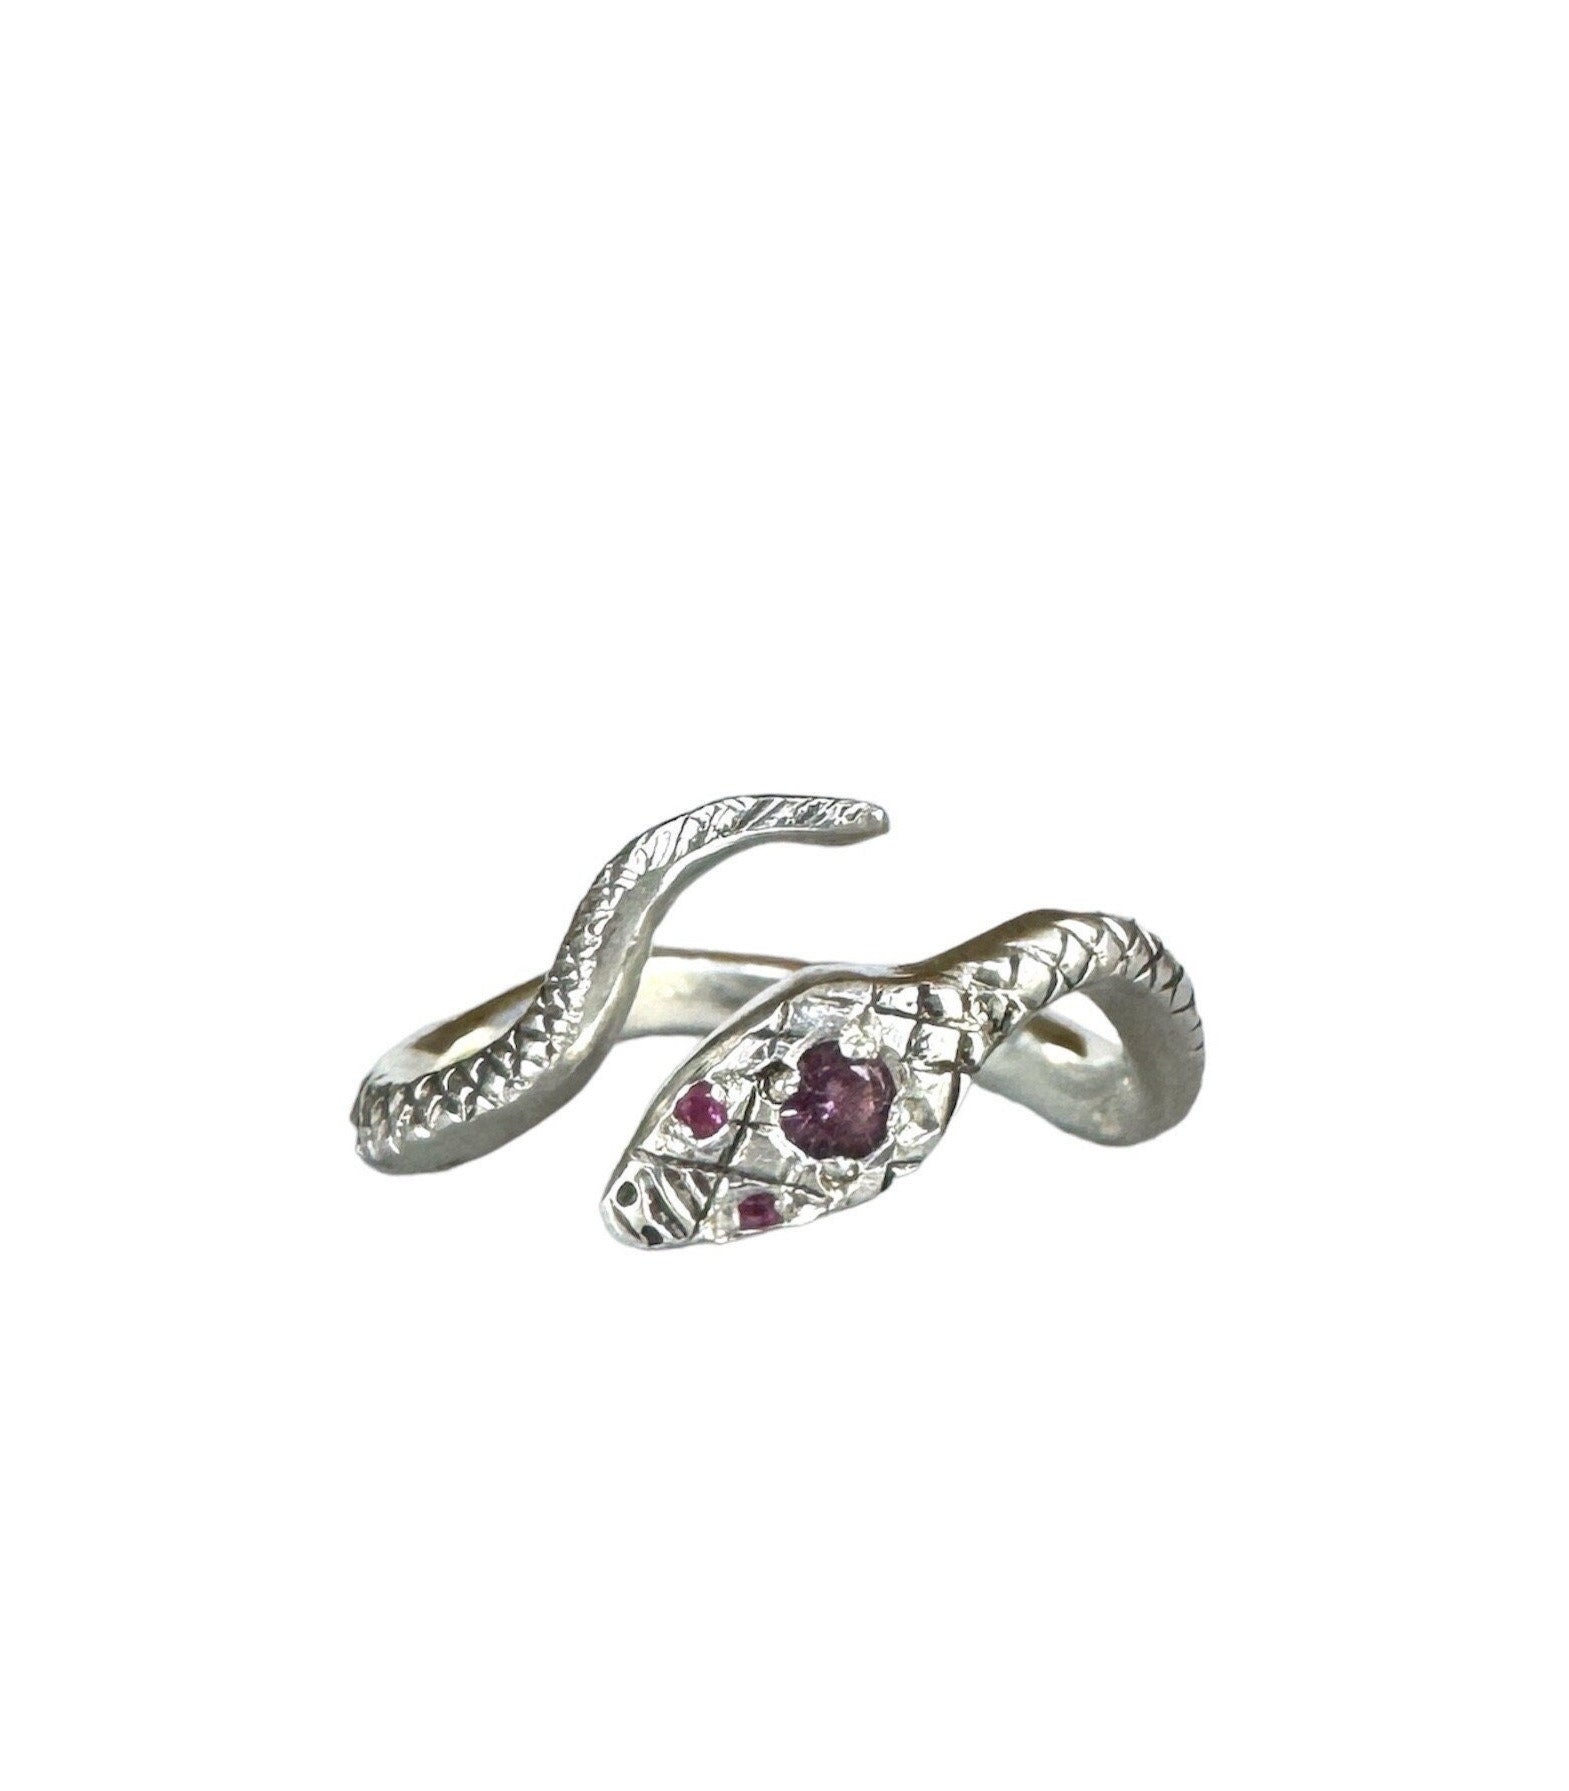 Snake ring in sterling silver with Ruby eyes and Spinel head gemstones.